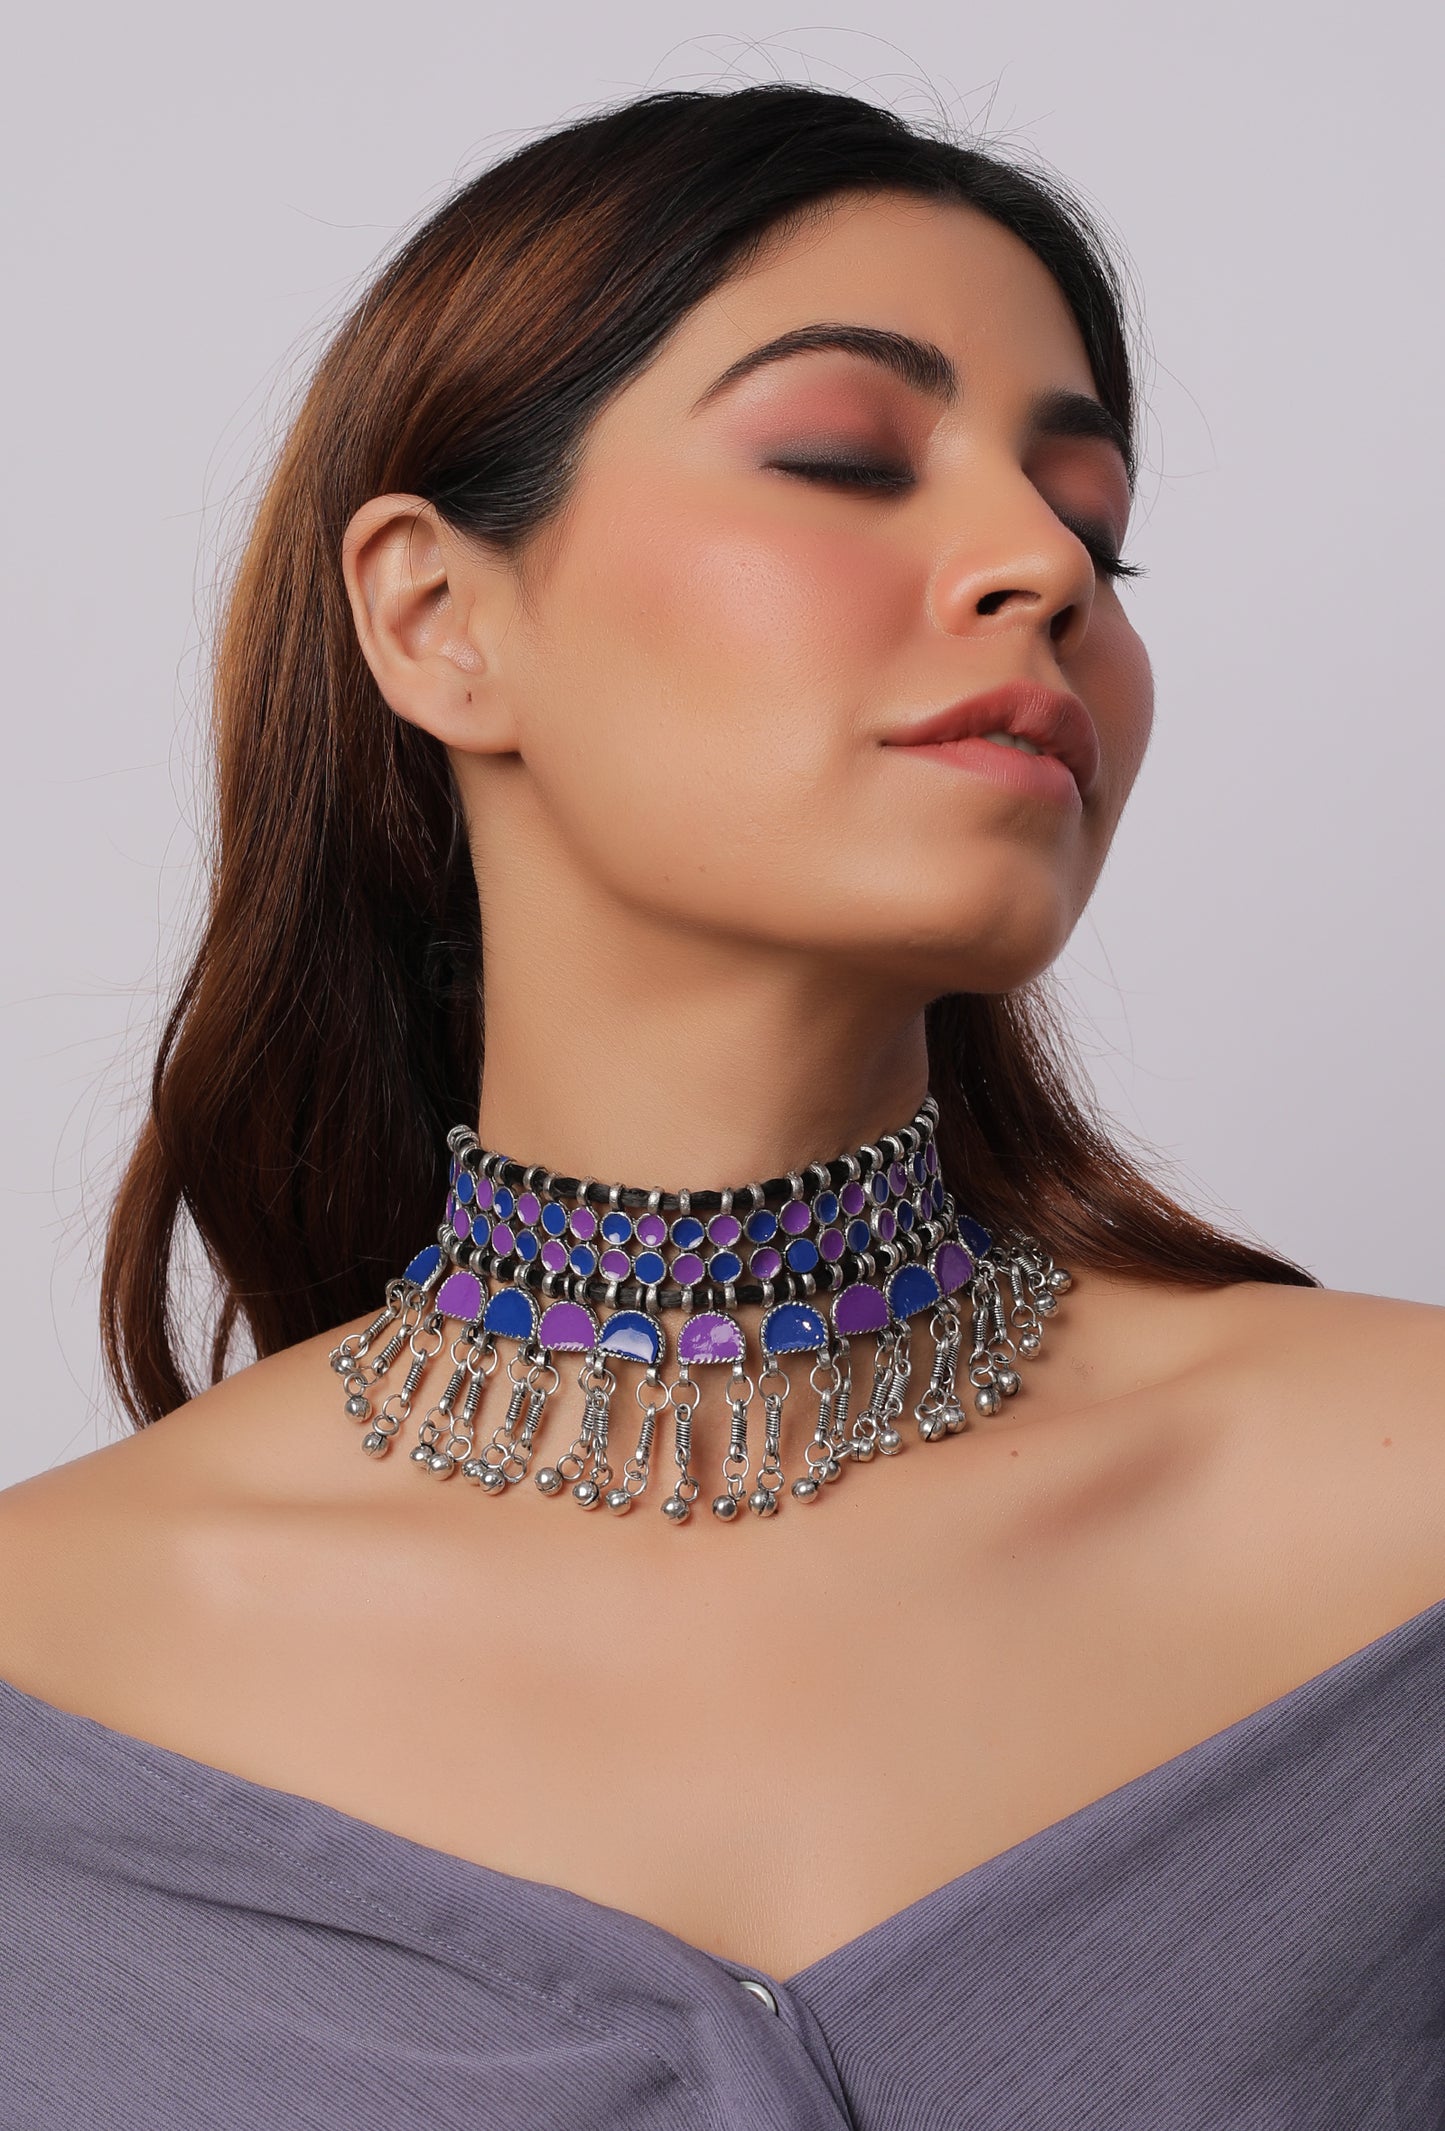 The Starry Constellation Choker in Blue & Purple